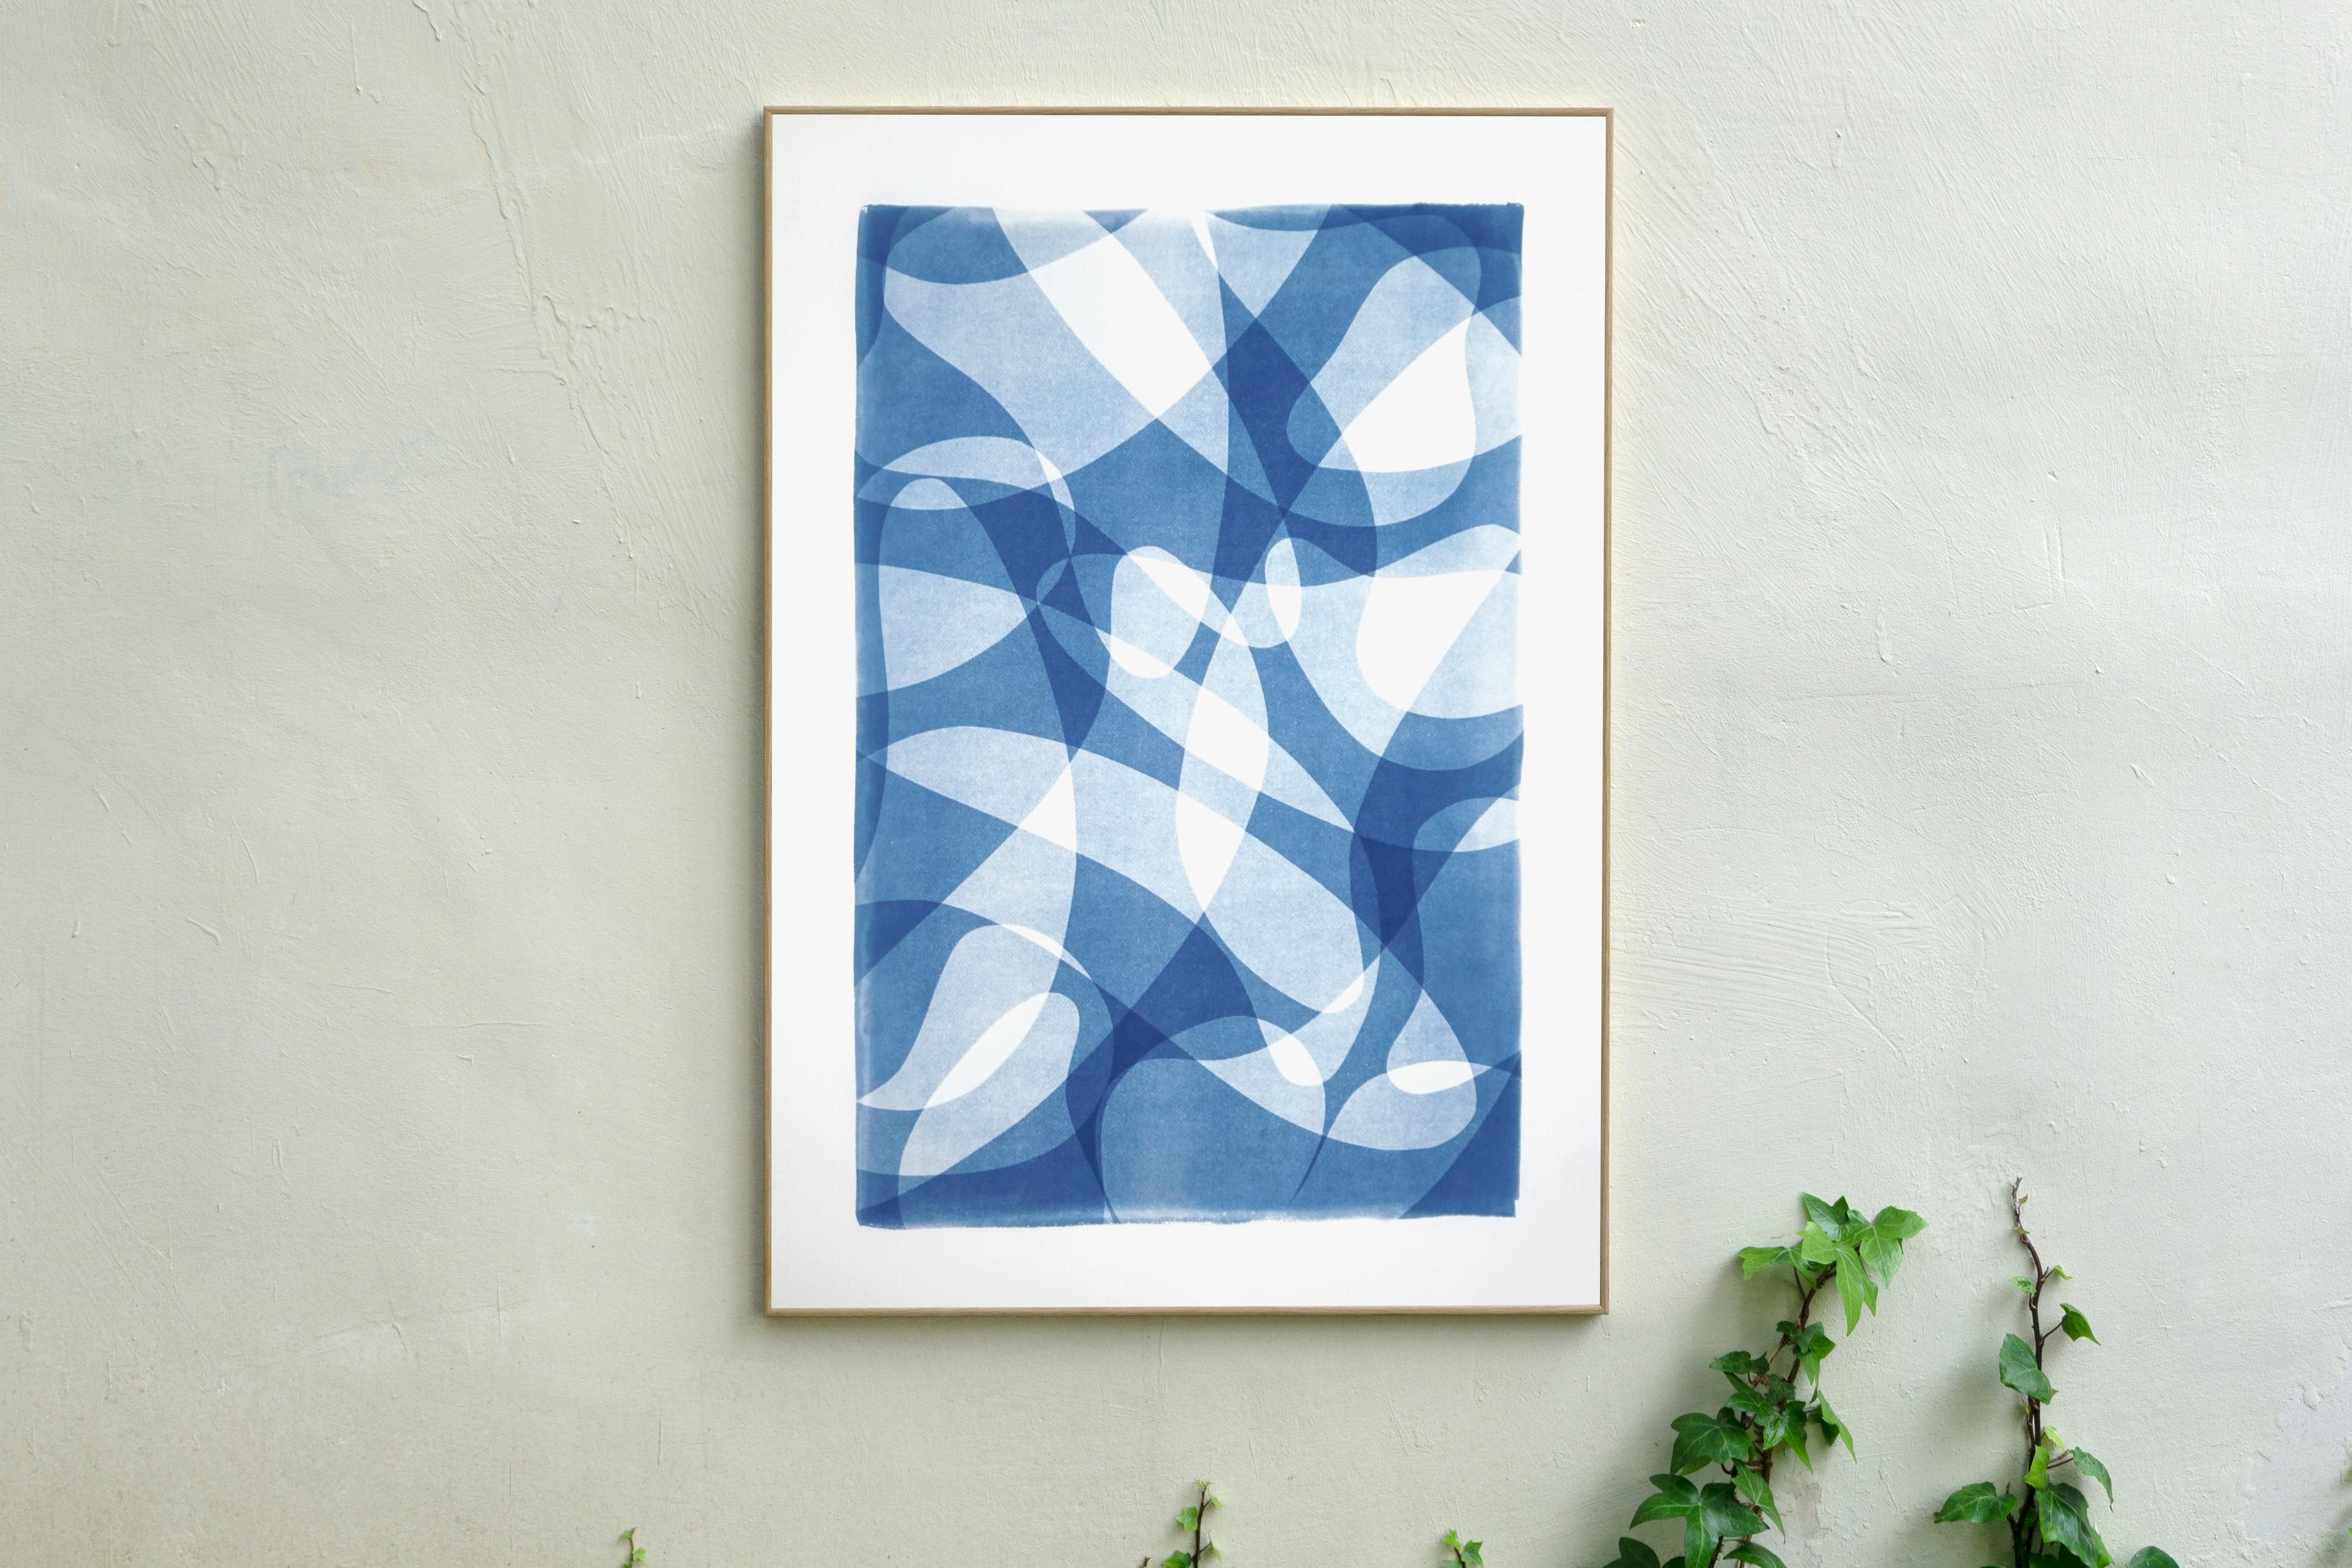 This is an exclusive handprinted unique cyanotype that takes its inspiration from the mid-century modern shapes.
It's made by layering paper cutouts and different exposures using uv-light. 

Details:
+ Title: Line Contours in Shade Gradients I
+